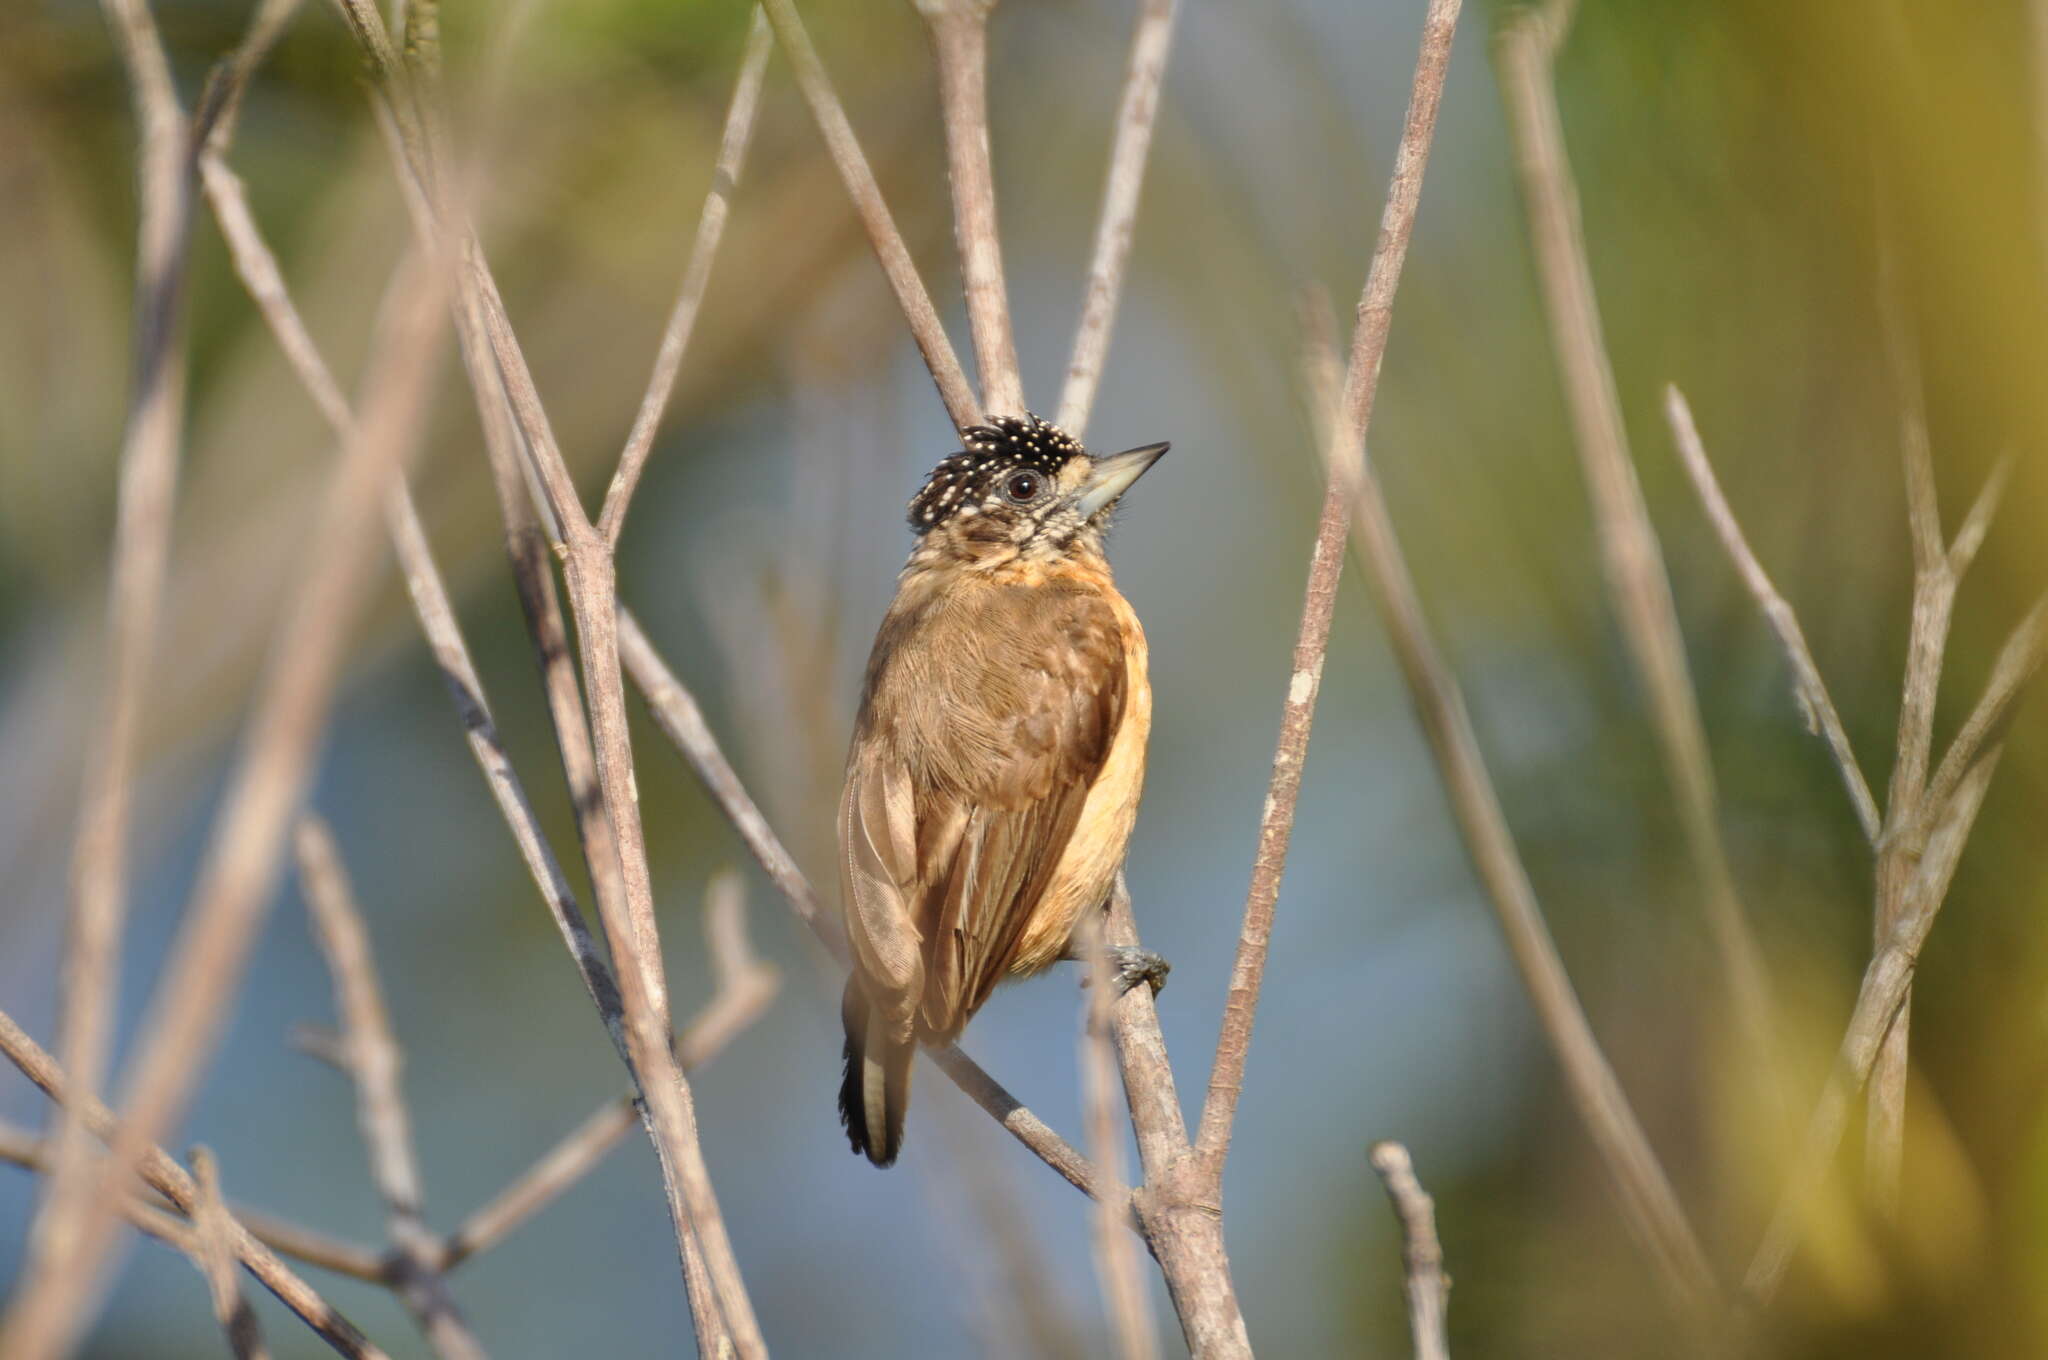 Image of Ochraceous Piculet